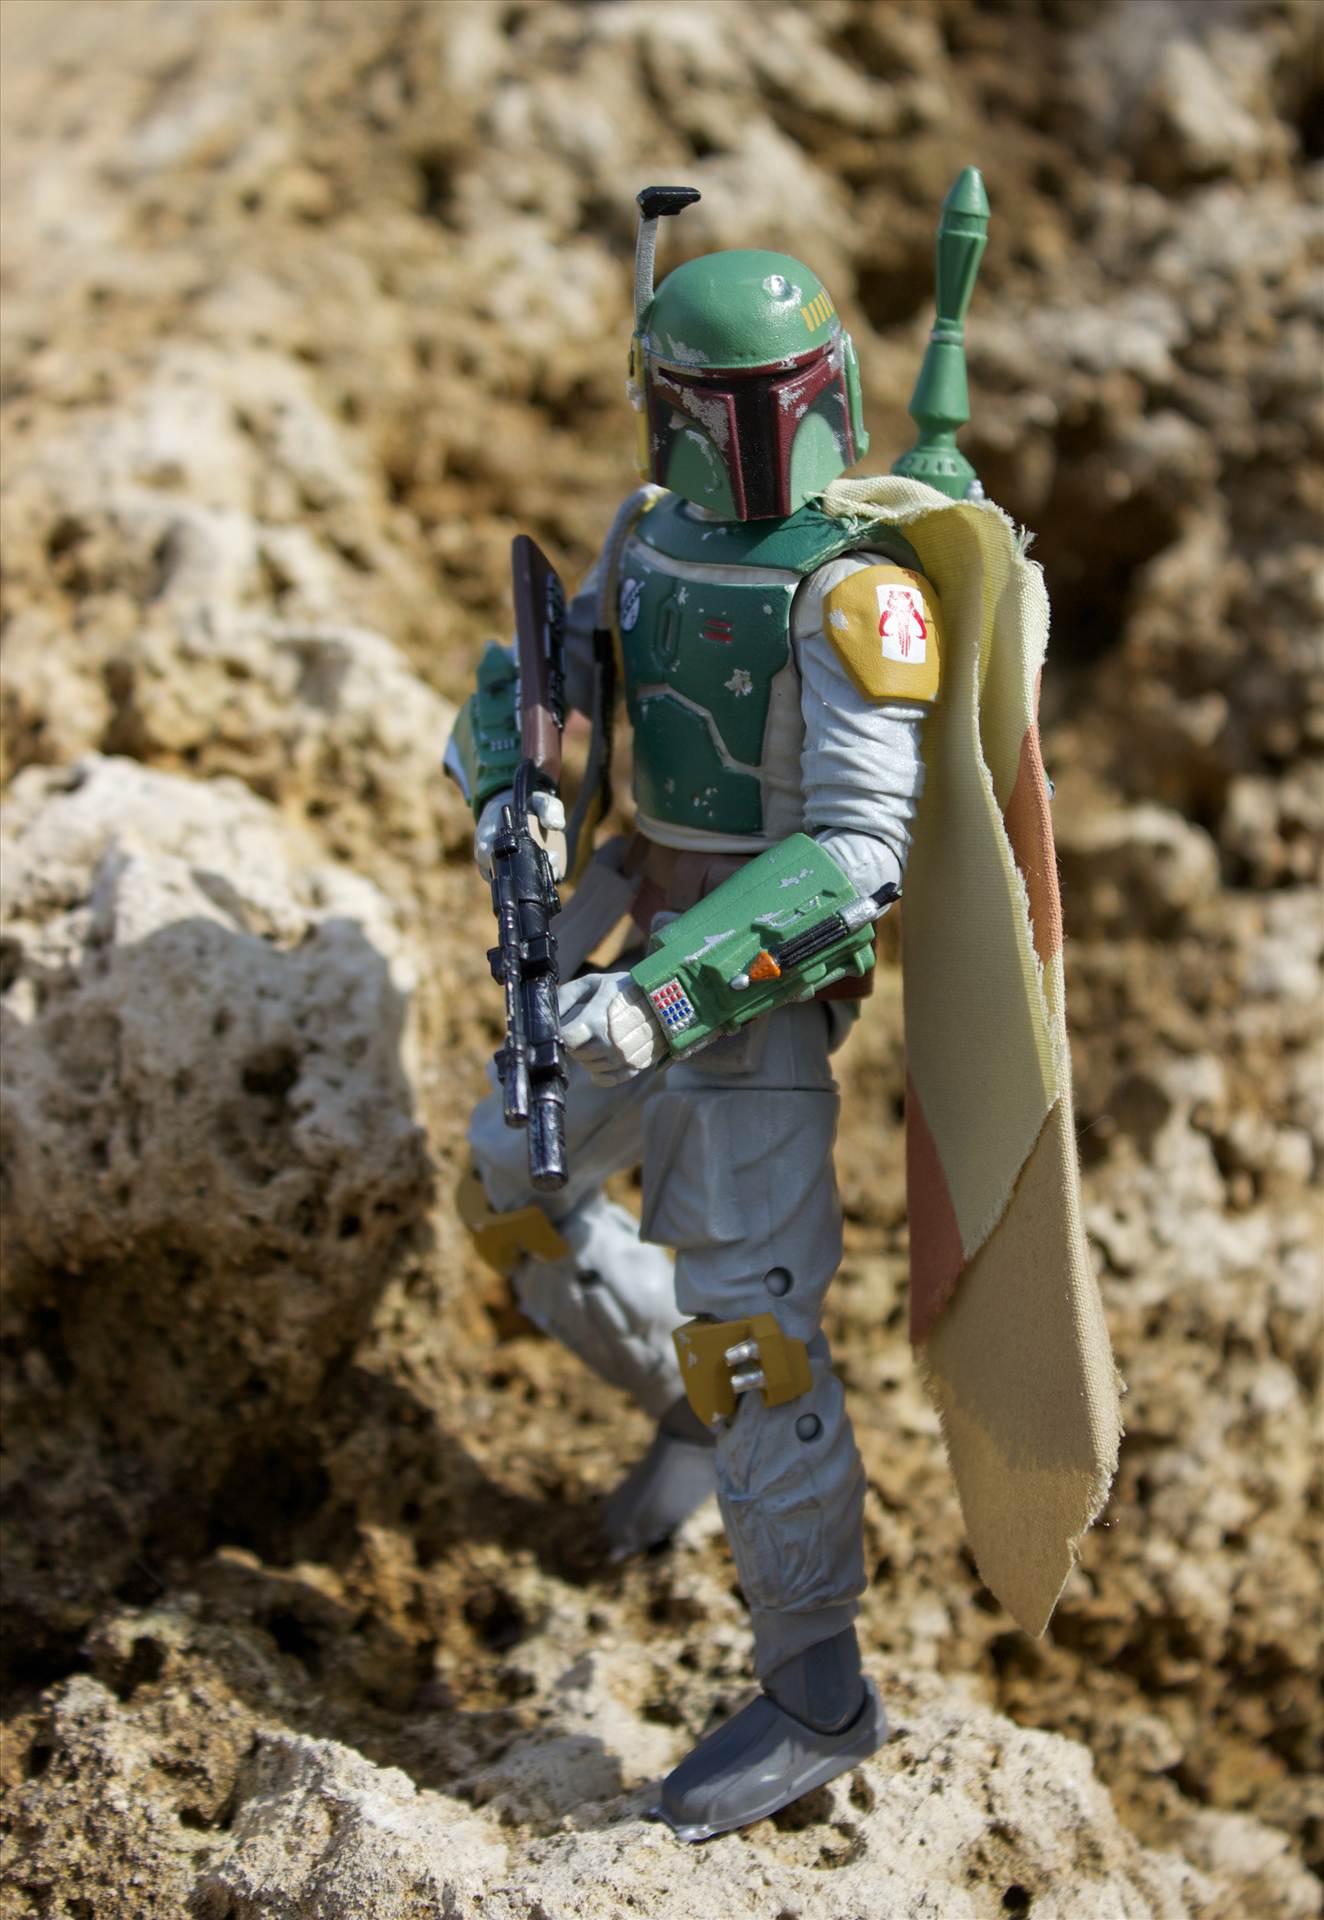 Boba Fett An image I took of one of my Boba Fett action figures by WPC-27